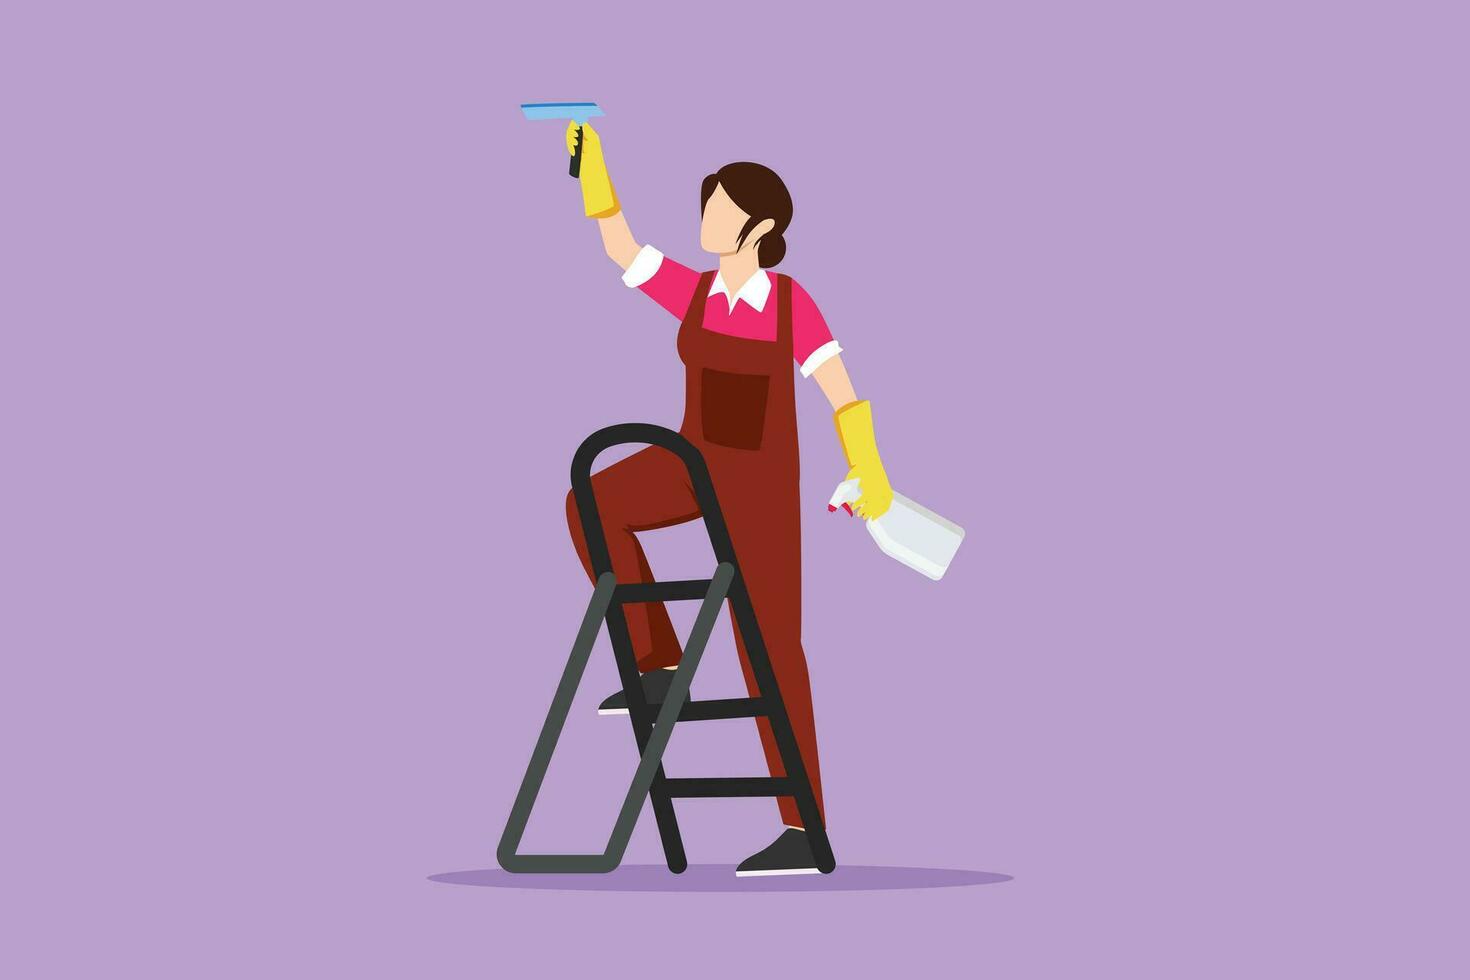 Cartoon flat style drawing pretty woman cleaner standing on ladder, washing with wiper. Cleaning service, cleaning tools, washing sponge, house cleaning, housework. Graphic design vector illustration